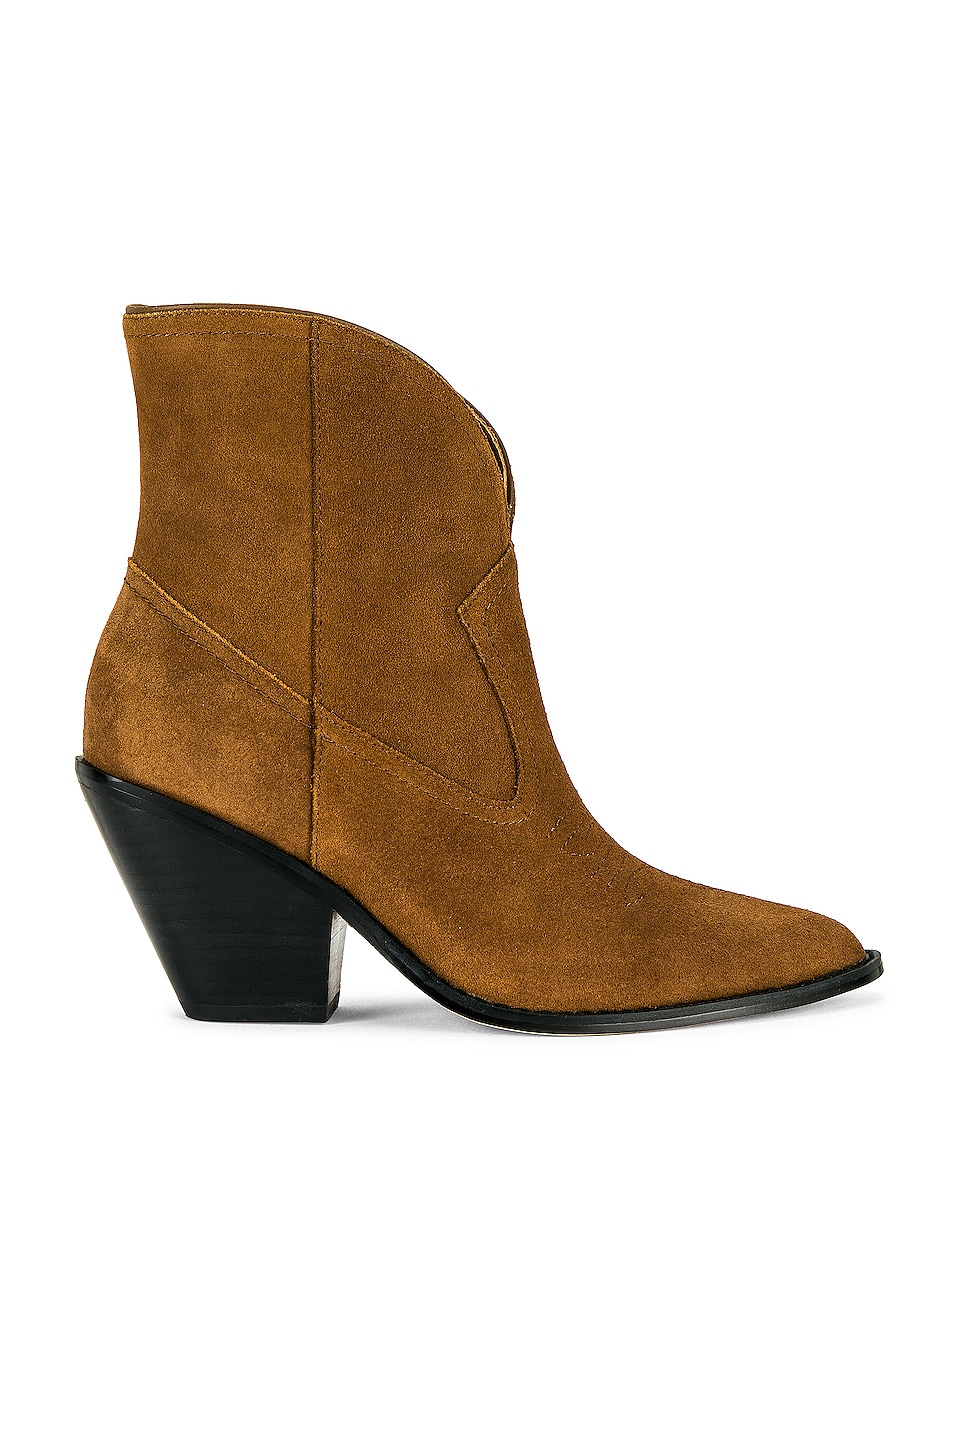 House of Harlow 1960 x REVOLVE Victor Bootie in Tan